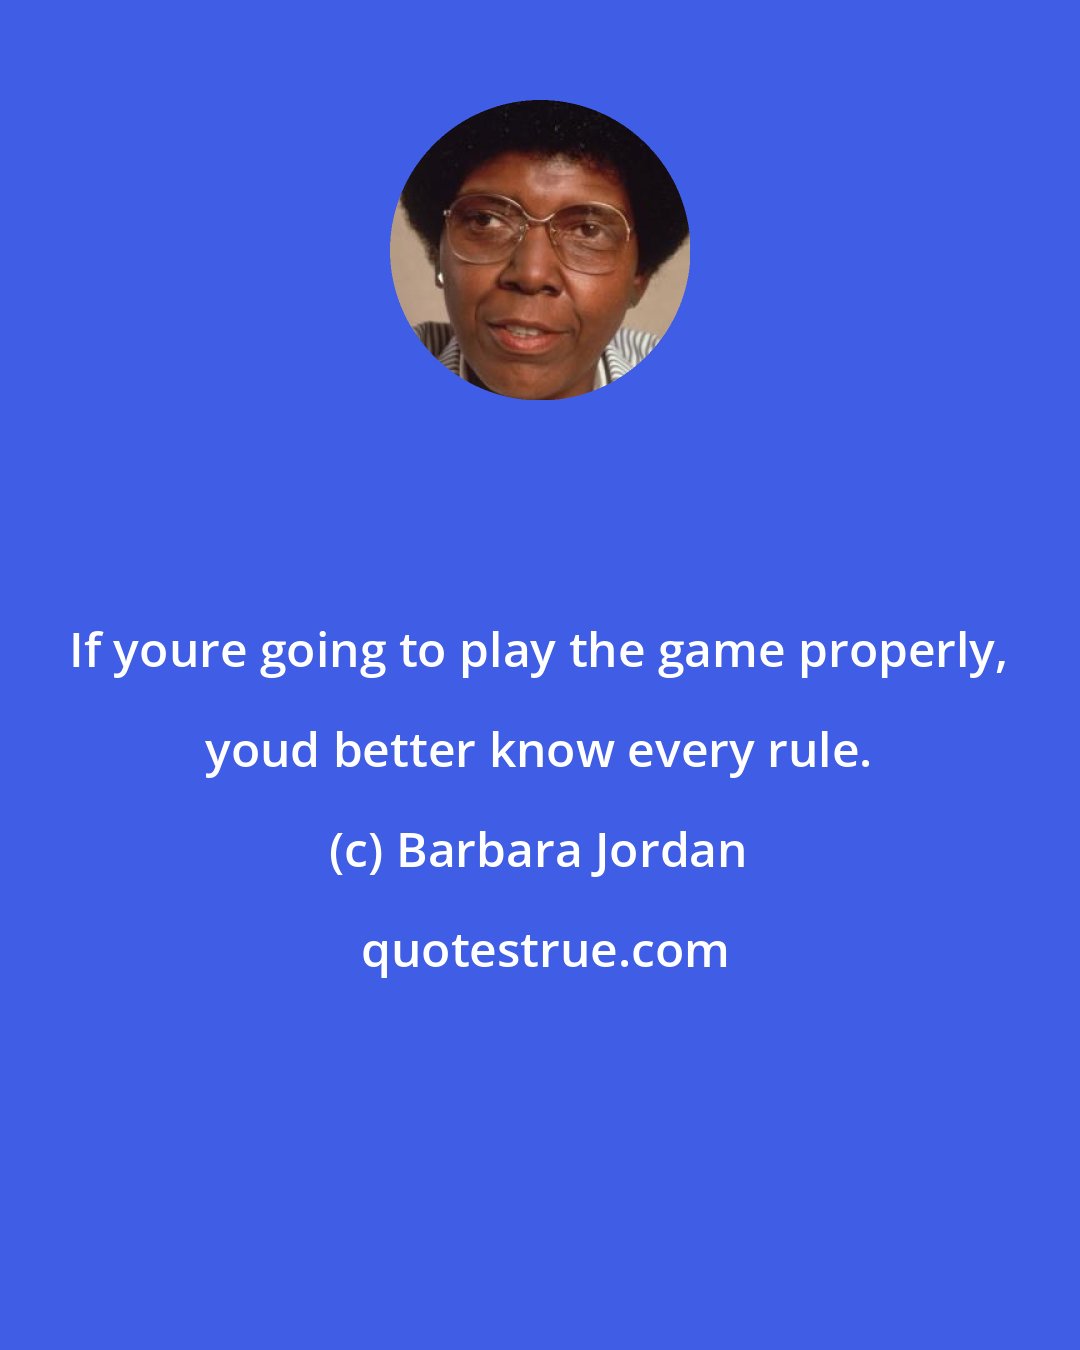 Barbara Jordan: If youre going to play the game properly, youd better know every rule.